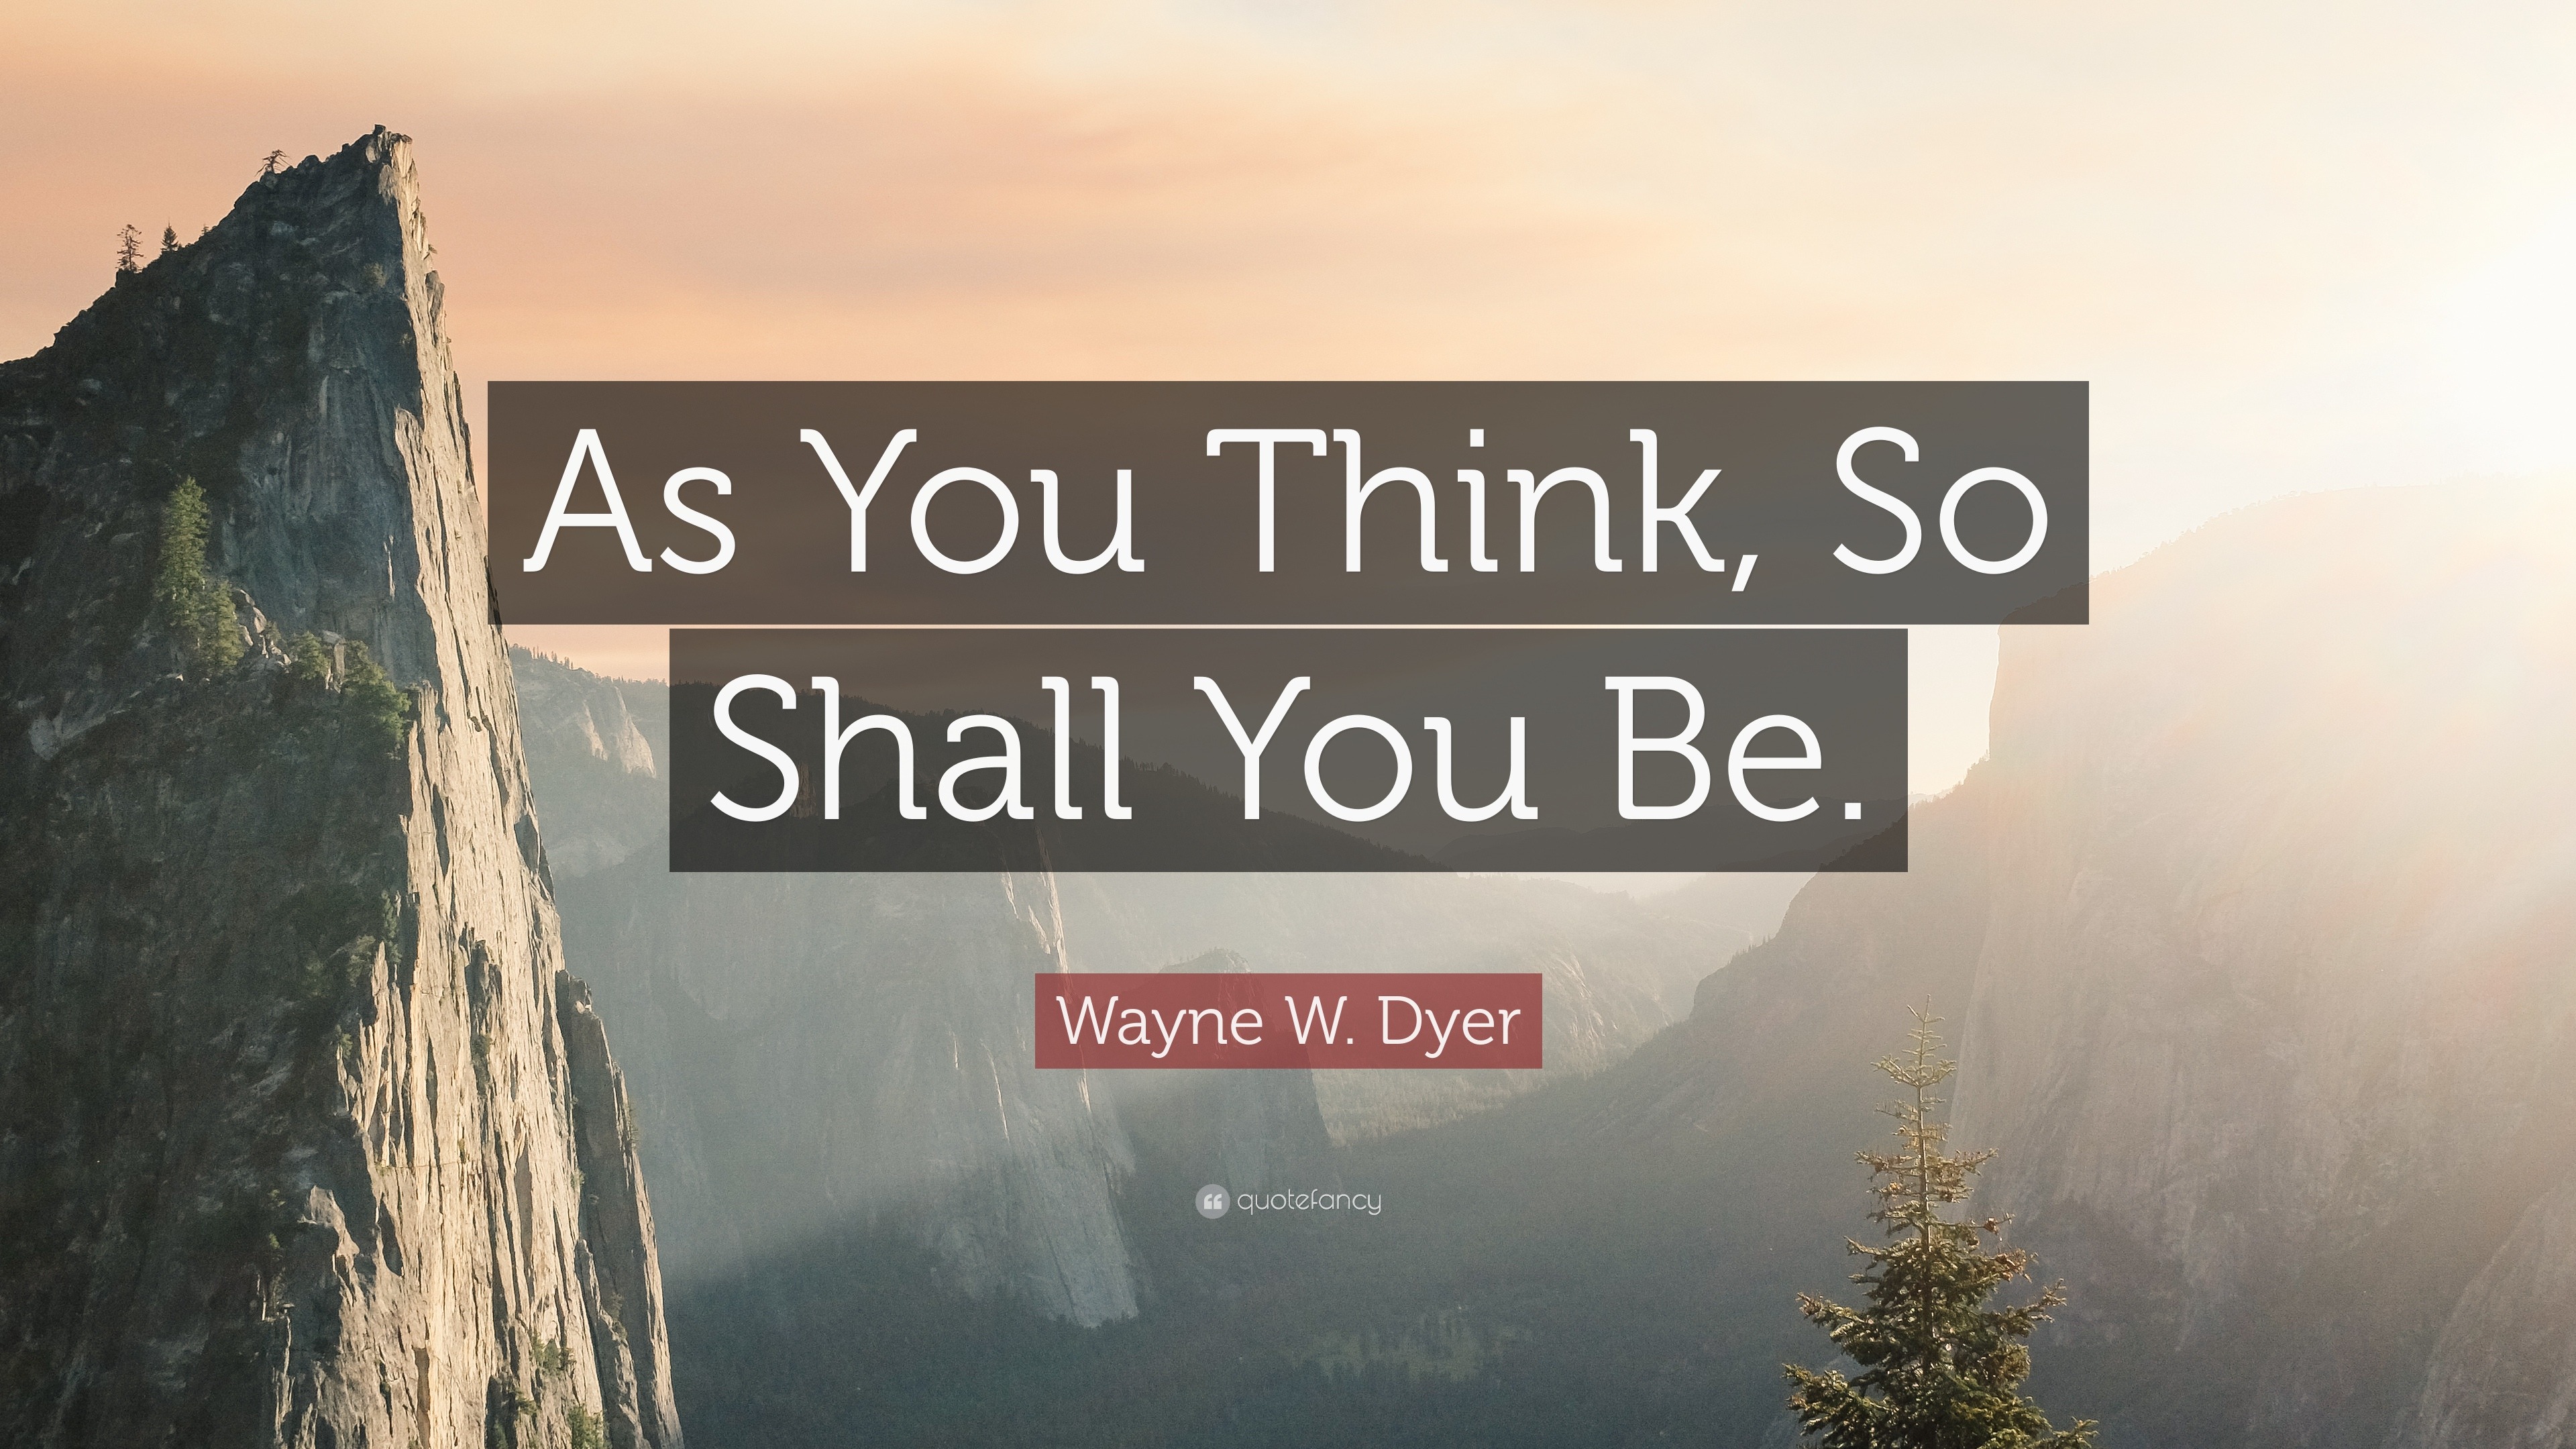 Wayne W Dyer Quote As You Think So Shall You Be 12 Wallpapers Quotefancy